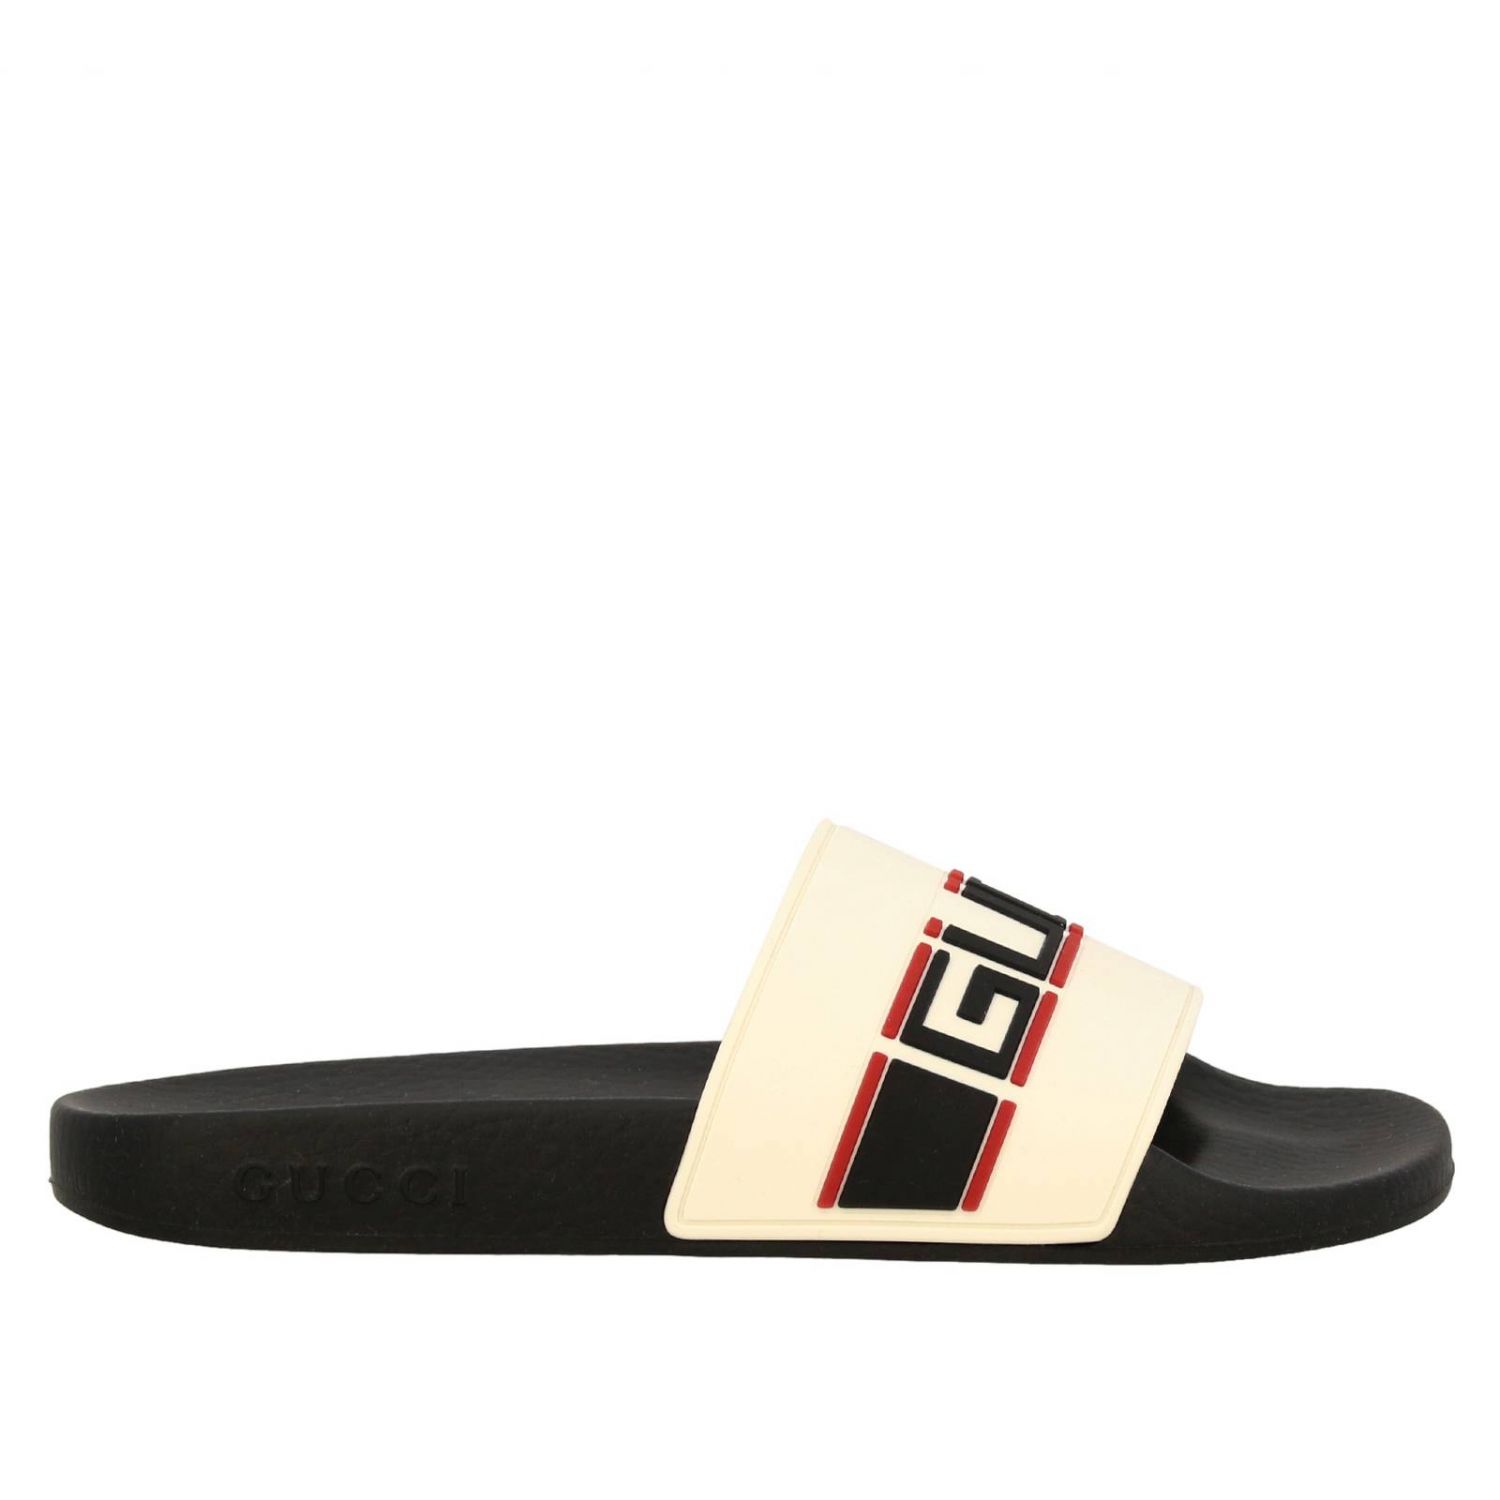 gucci rubber shoes for women